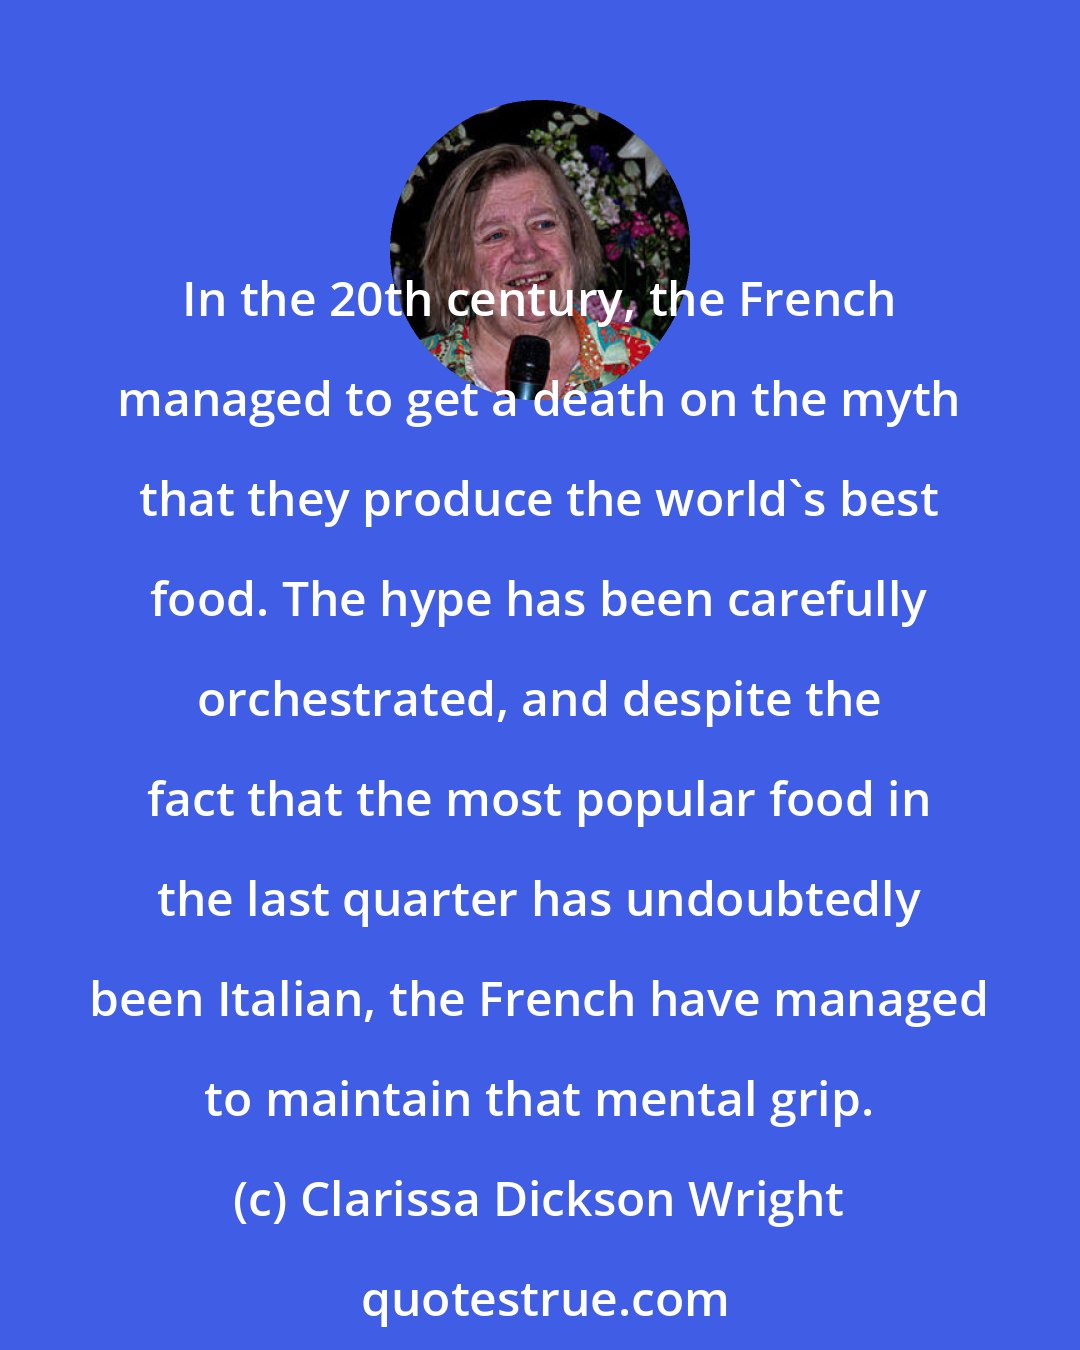 Clarissa Dickson Wright: In the 20th century, the French managed to get a death on the myth that they produce the world's best food. The hype has been carefully orchestrated, and despite the fact that the most popular food in the last quarter has undoubtedly been Italian, the French have managed to maintain that mental grip.